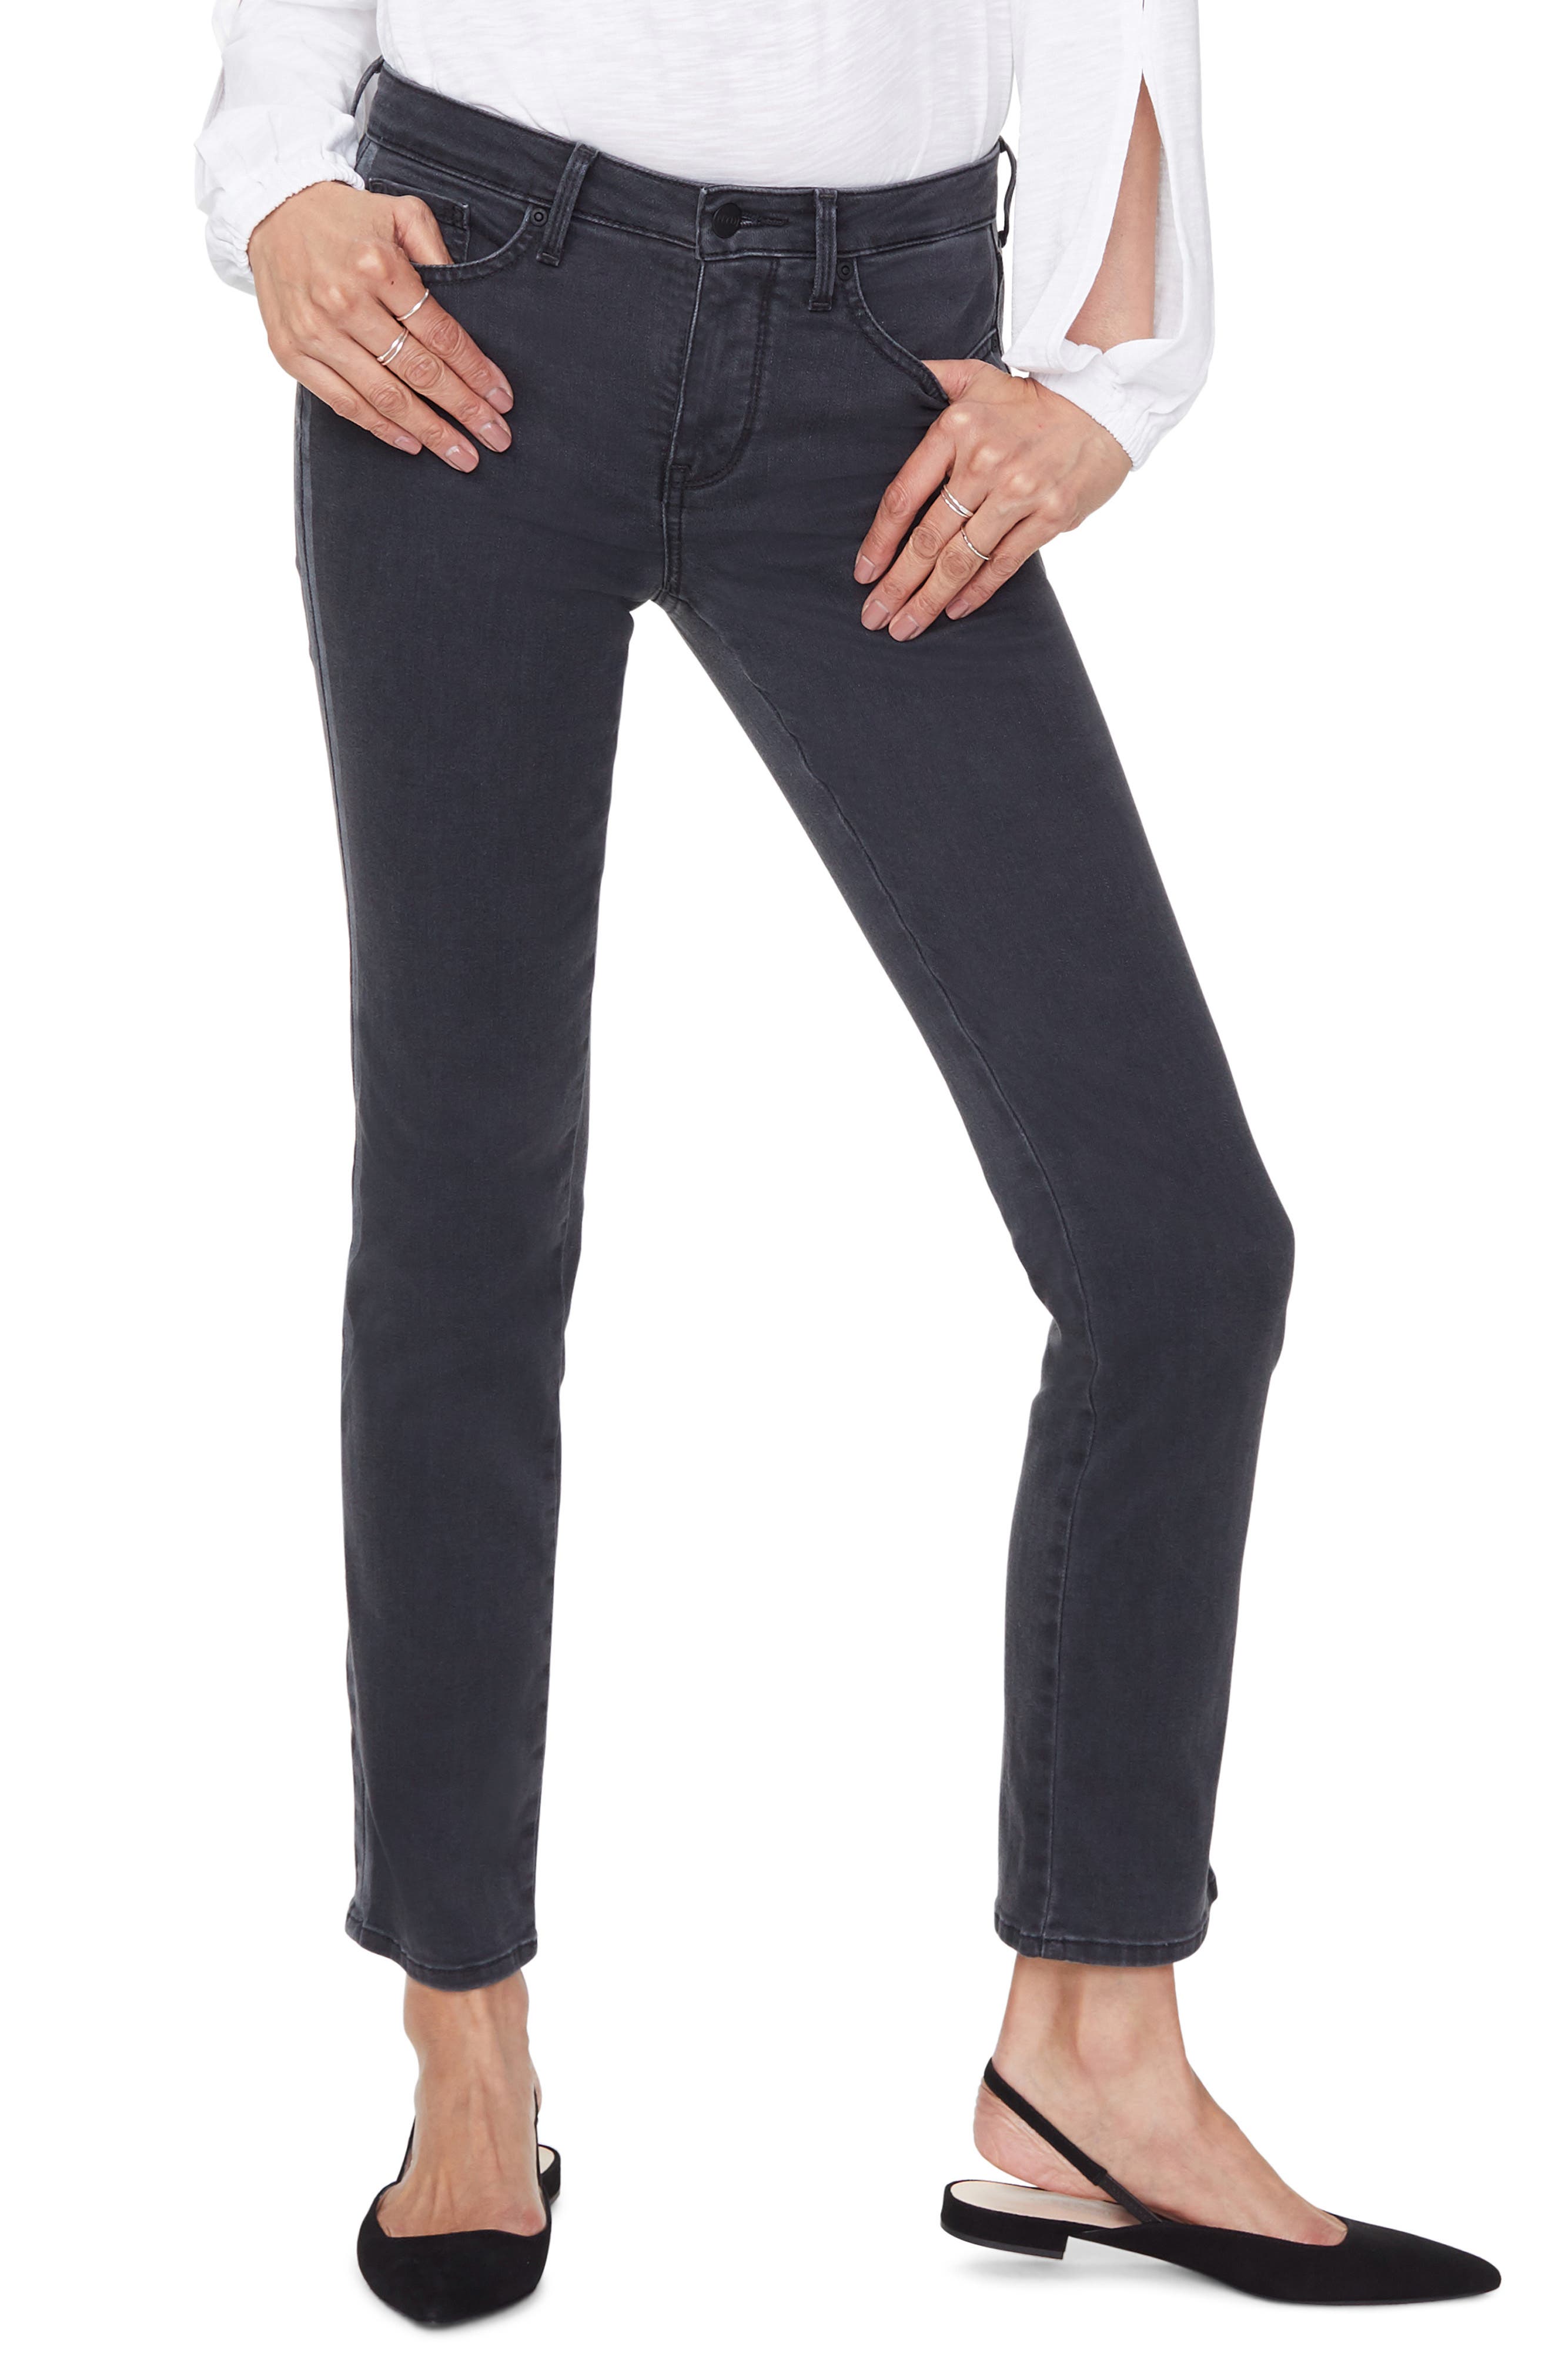 jeans with stripe on side womens